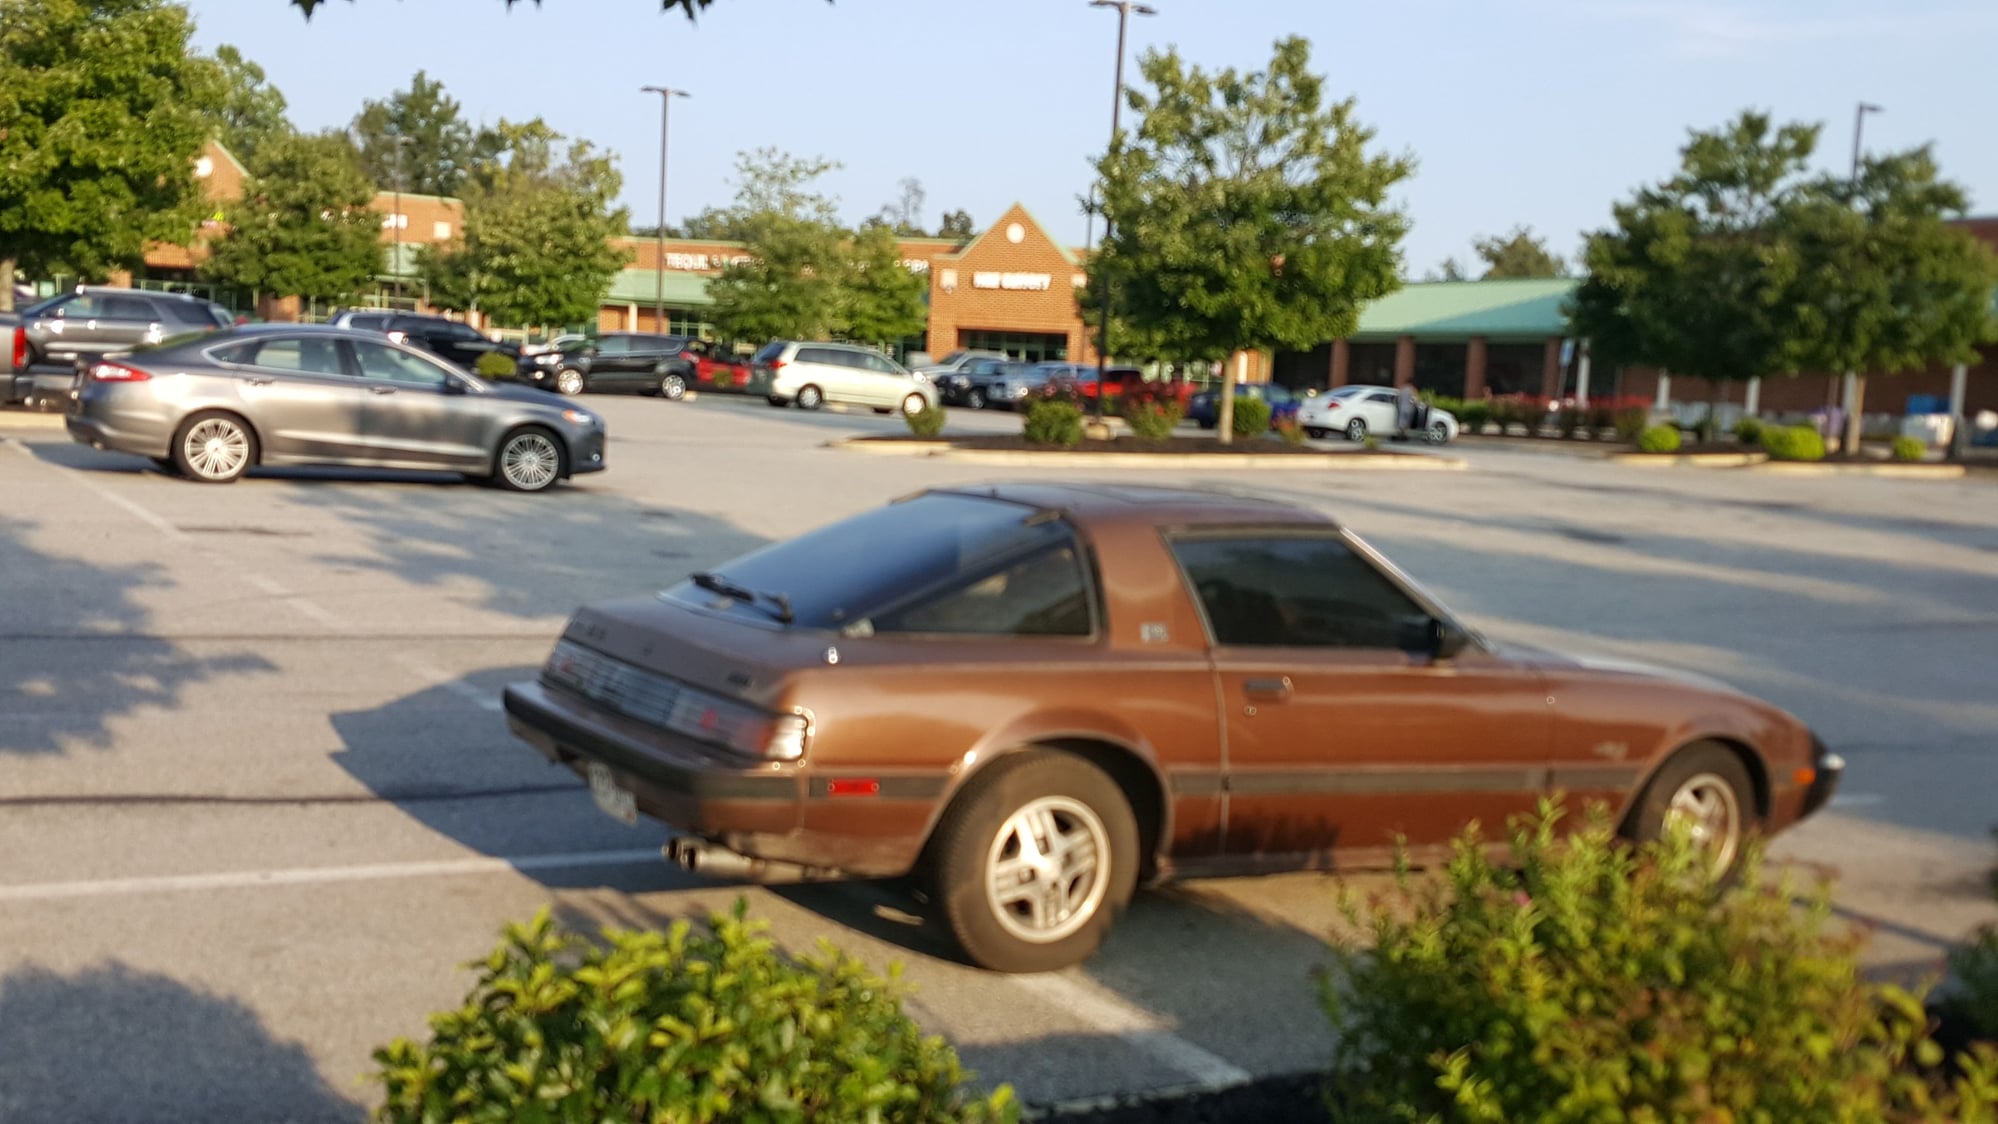 1983 Mazda RX-7 - Project car - Used - VIN Jm1fb3317d0738894 - Manual - Brown - Great Mills, MD 20634, United States